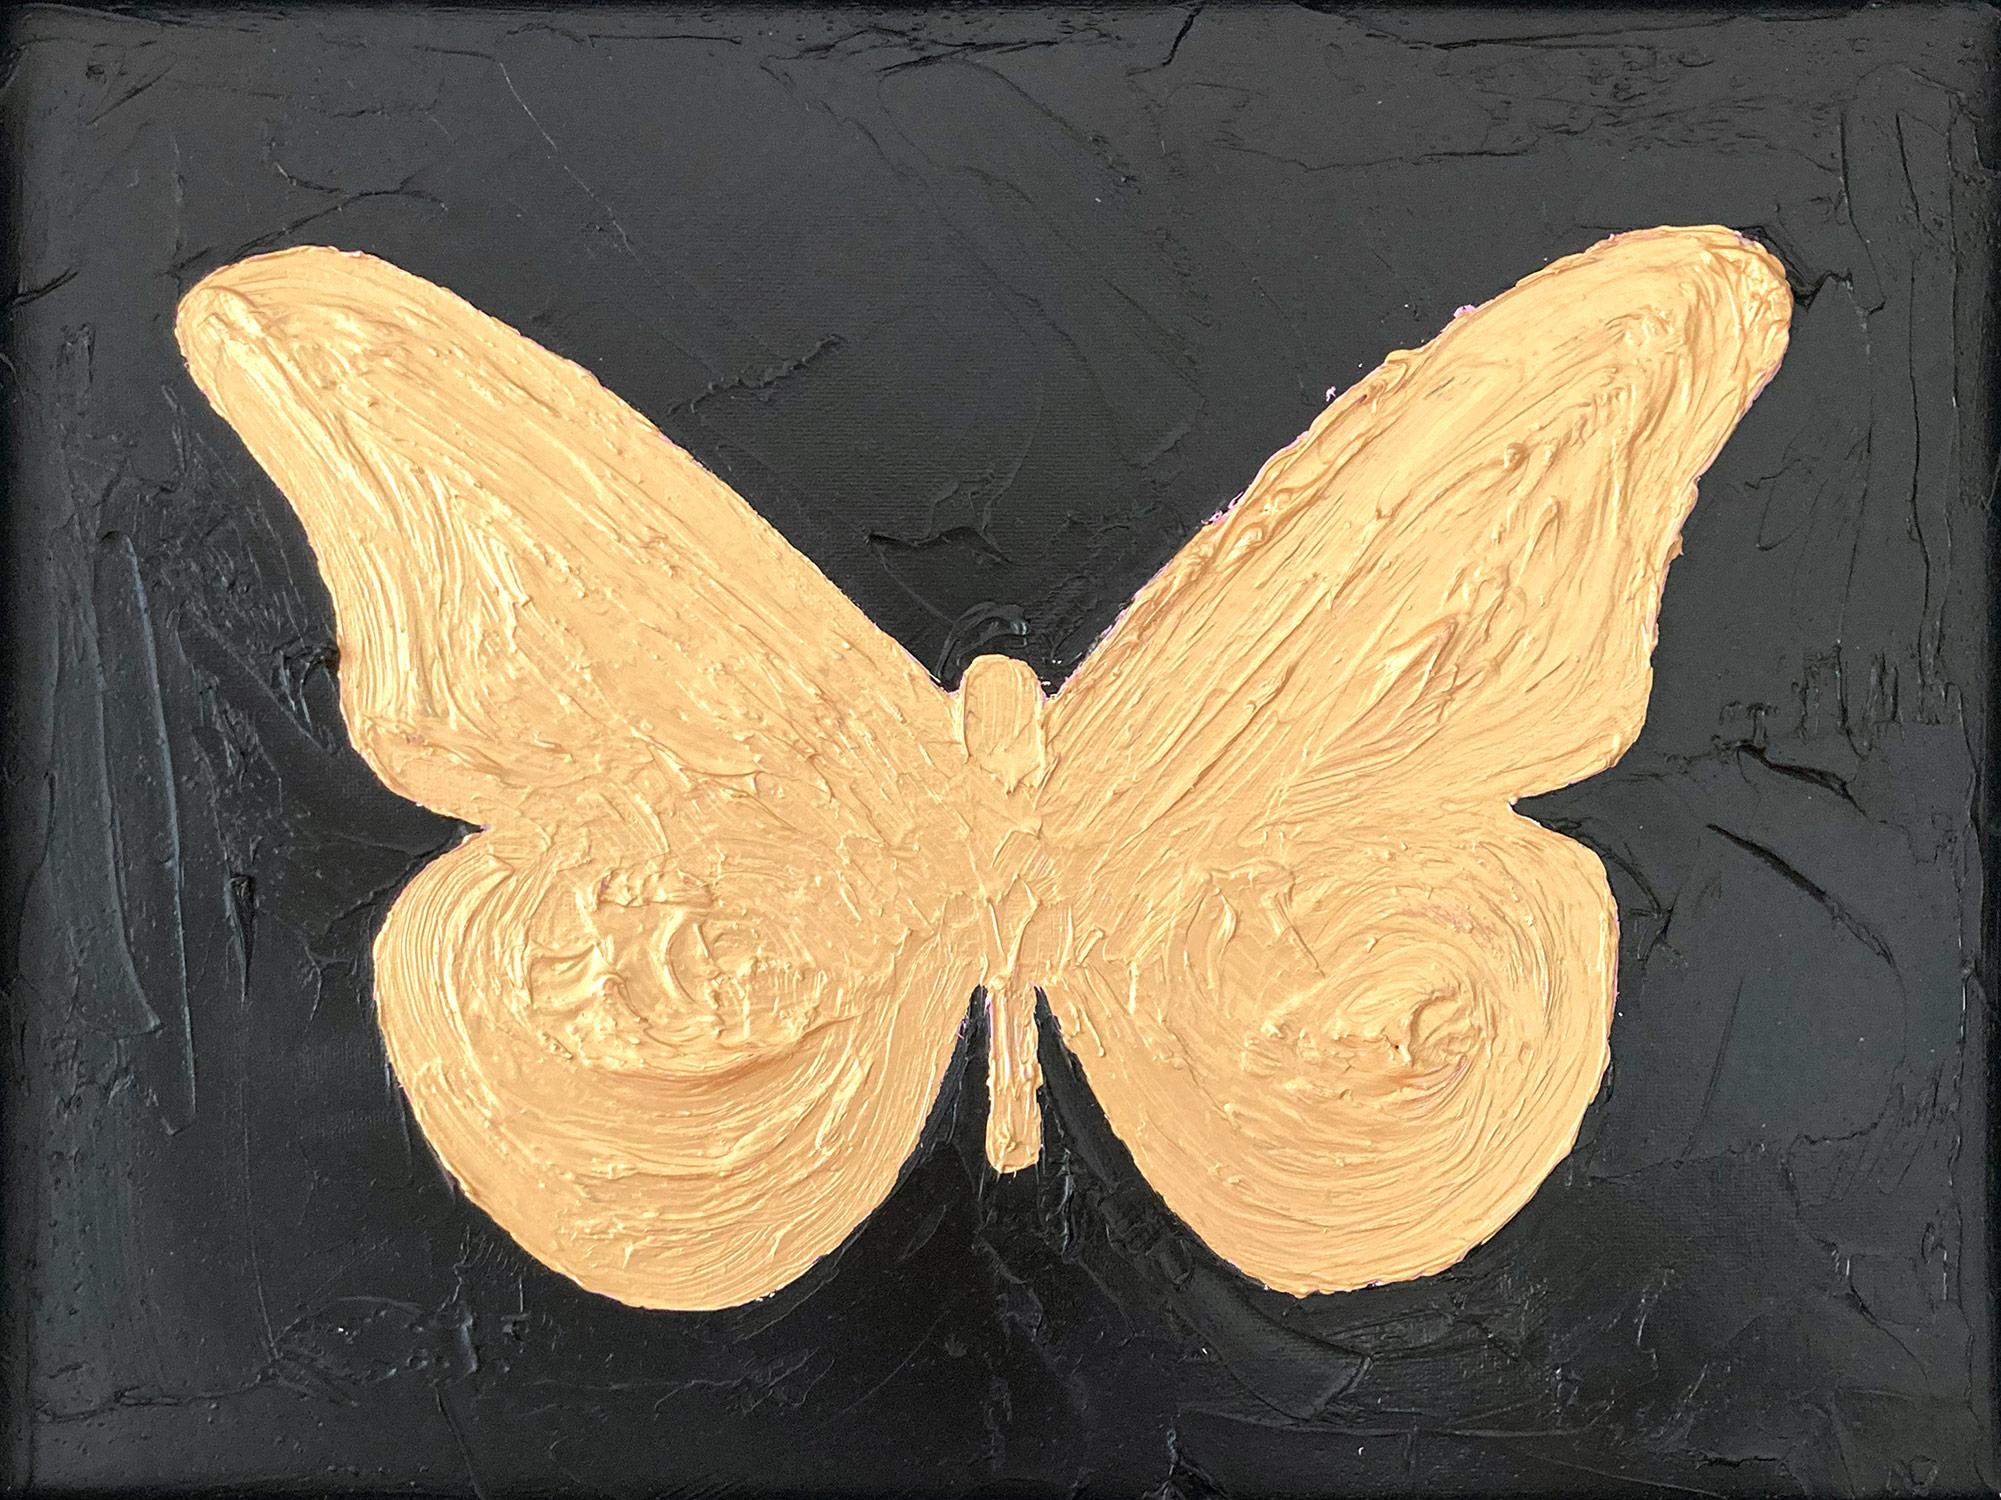 Motivated by bold color and fast brushwork, we are moved by the simplicity and thick textured oil paints in these works. Shaoul’s “My Butterfly Collection” is a vibrant and energetic display of transformation encapsulated in these playful